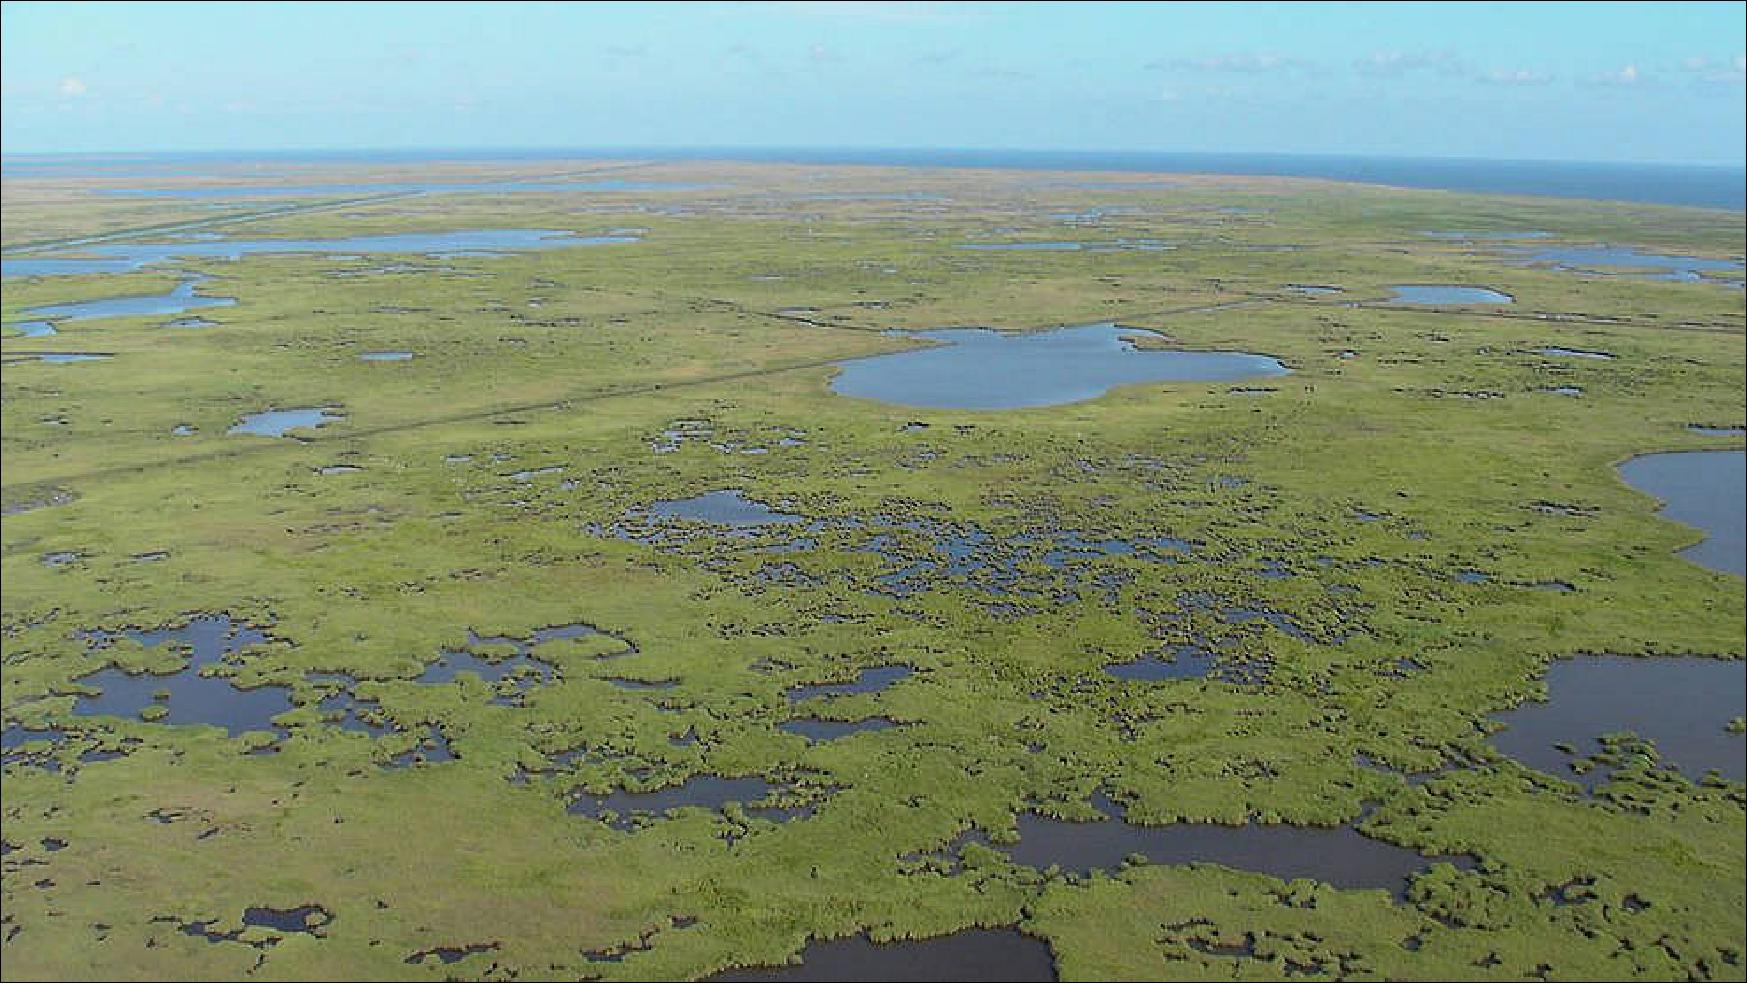 Figure 84: The Mississippi River Delta contains vast areas of marshes, swamps and barrier islands — important for wildlife and as protective buffers against storms and hurricanes. Rapid land subsidence due to sediment compaction and dewatering increases the rate of submergence in this system (image credit: K. L. McKee / U.S. Geological Survey)